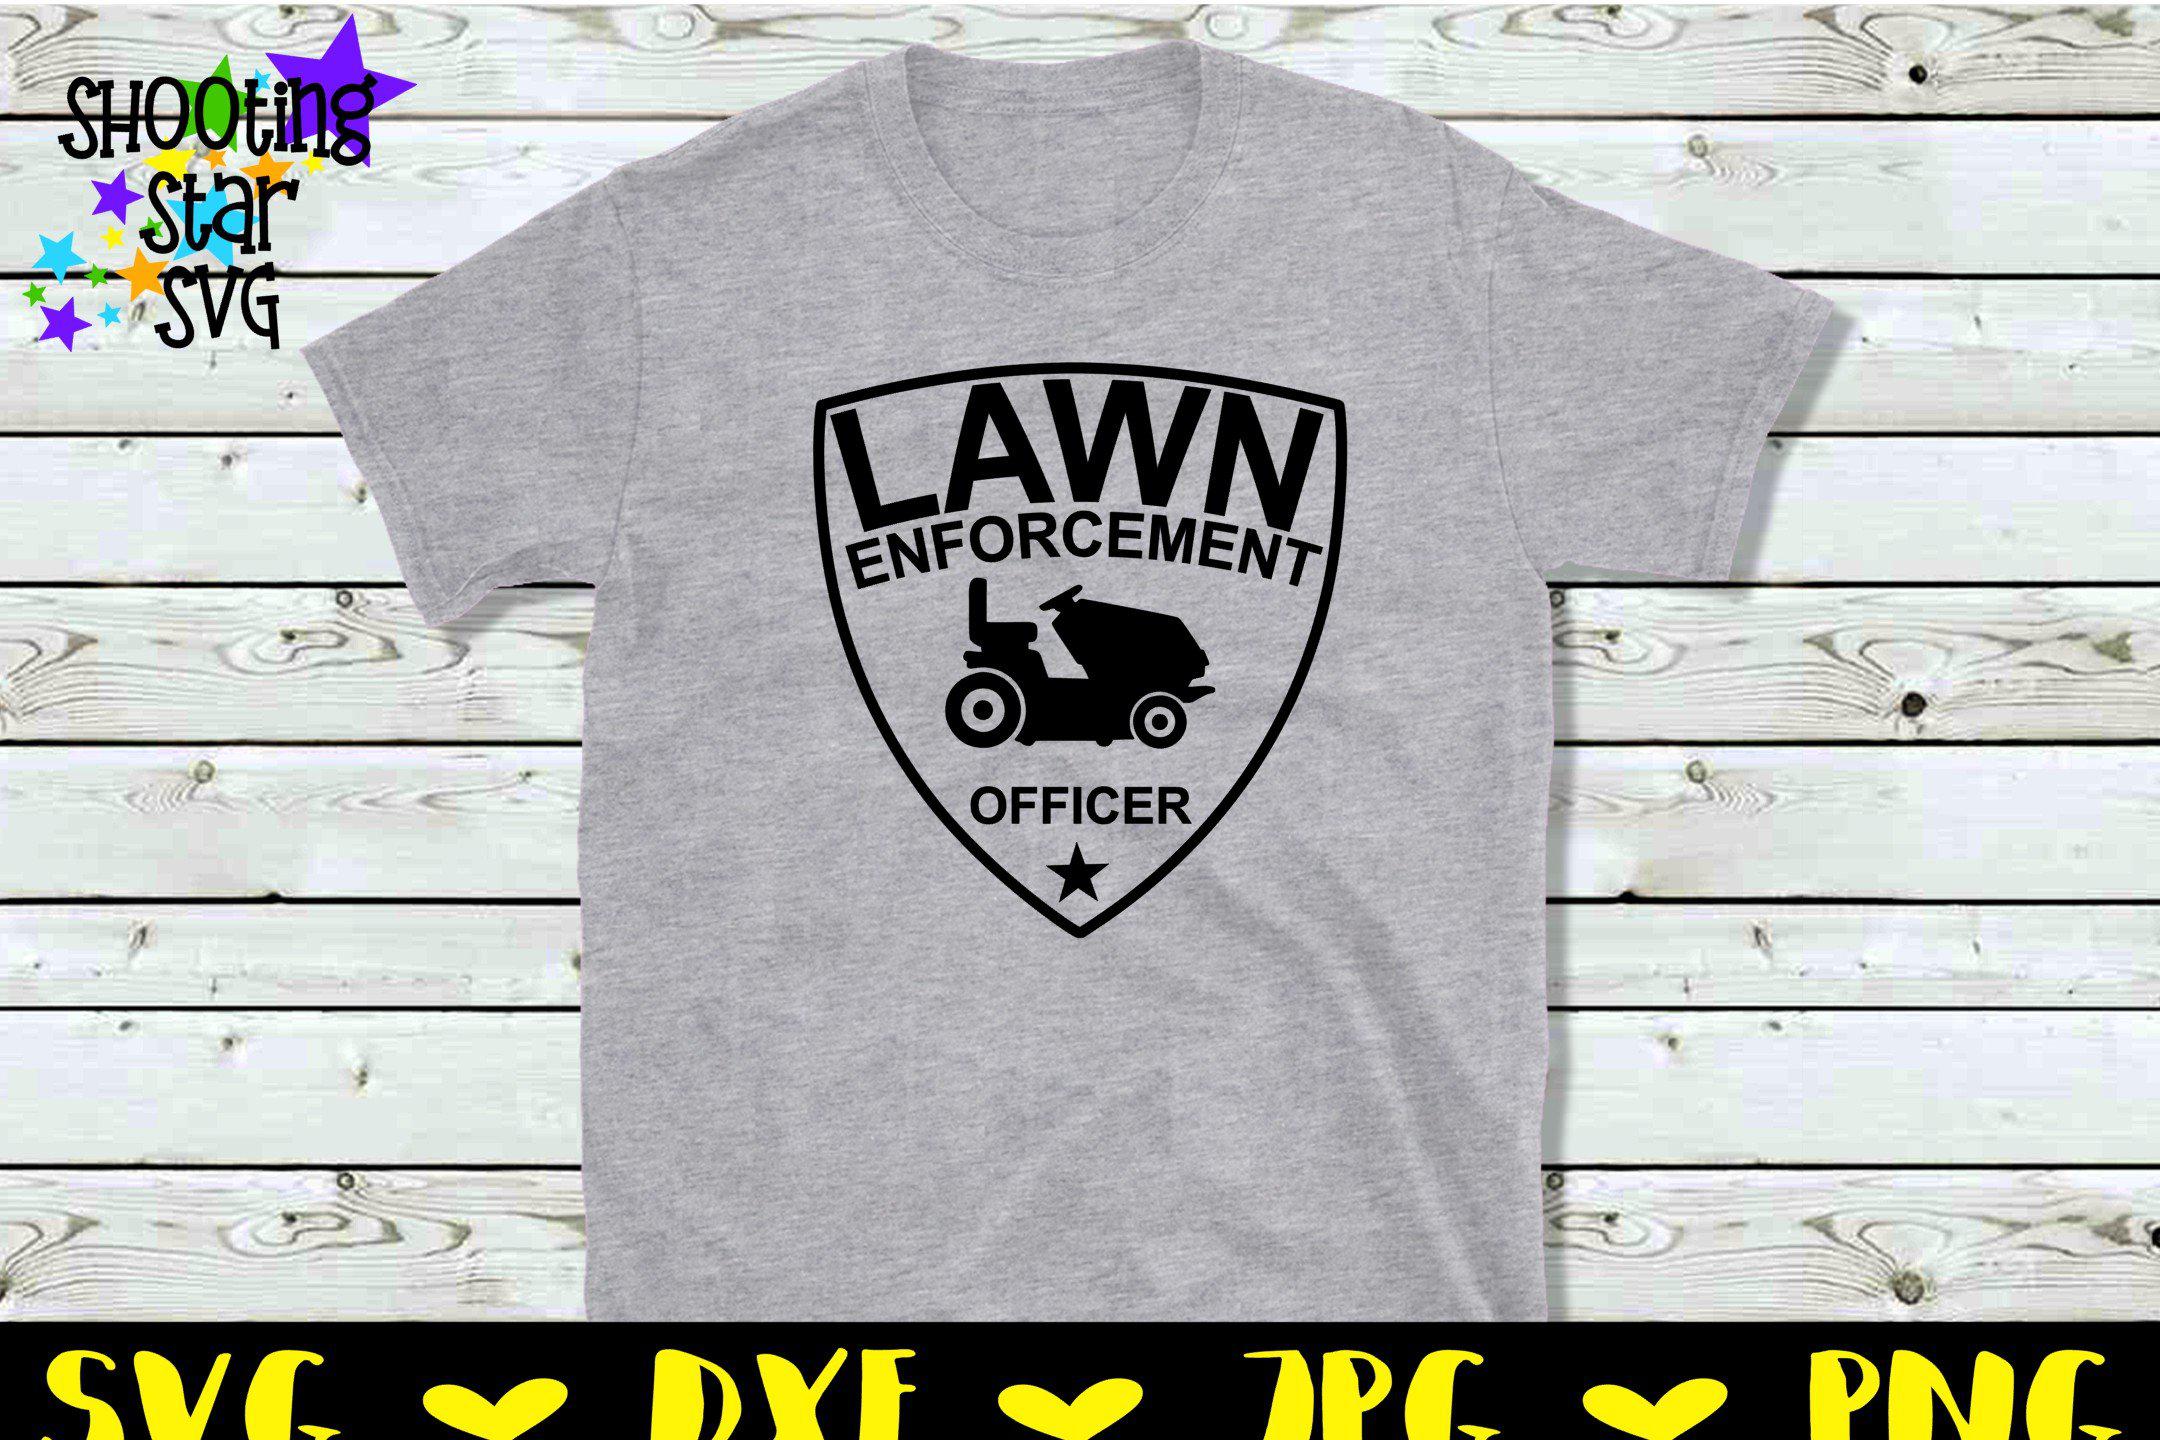 Lawn Enforcement Officer SVG - Father's Day SVG